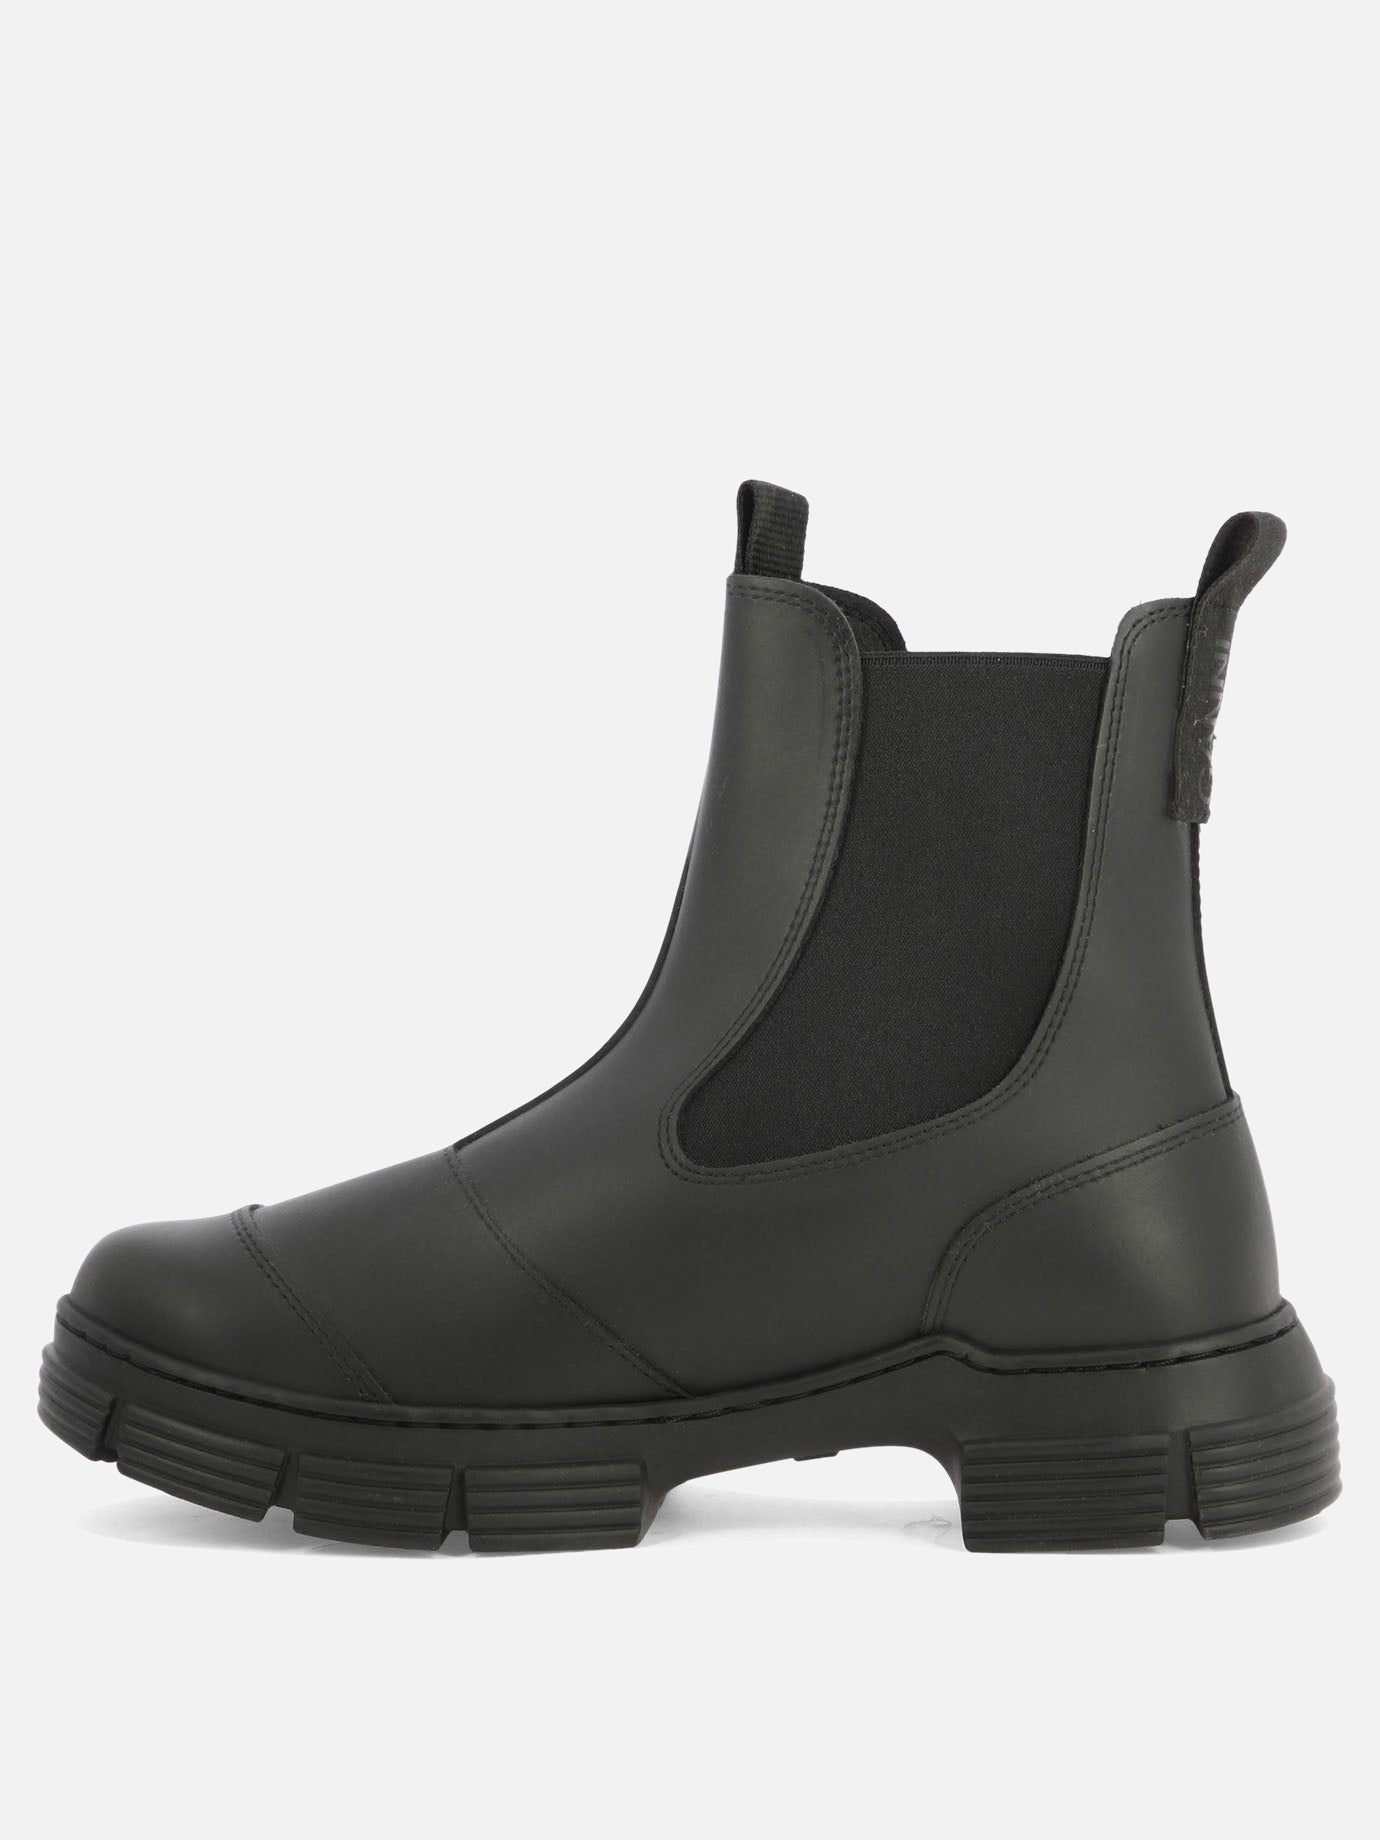 "City Recycled Rubber" ankle boots